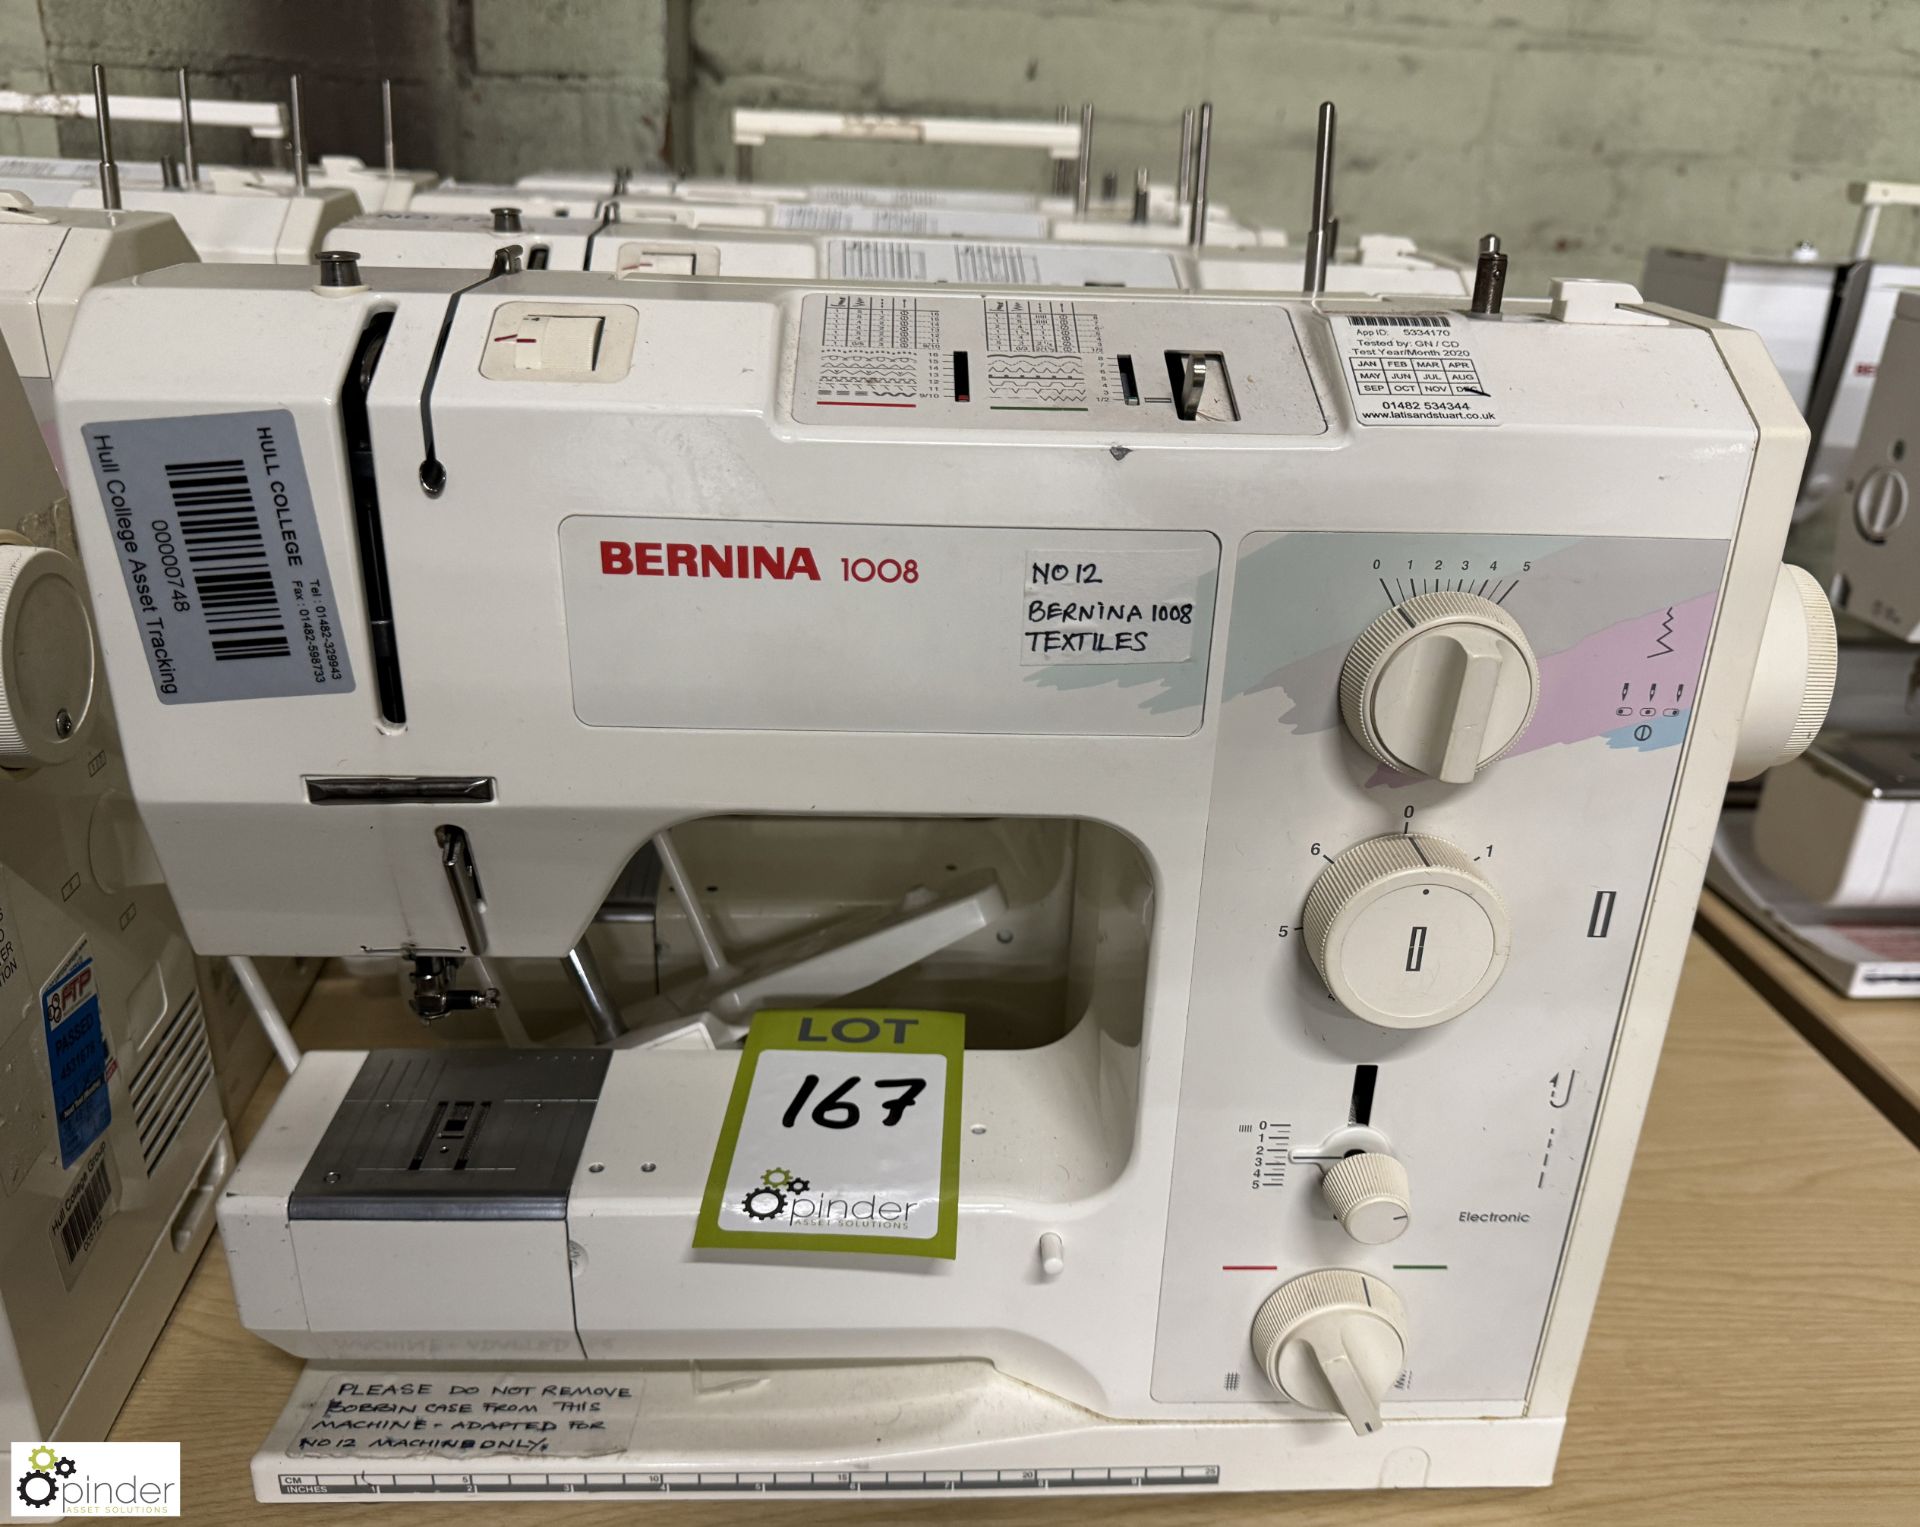 4 Bermina 1008 Domestic Lockstitch Sewing Machines, 240volts (no power leads or foot controls) - Image 2 of 5